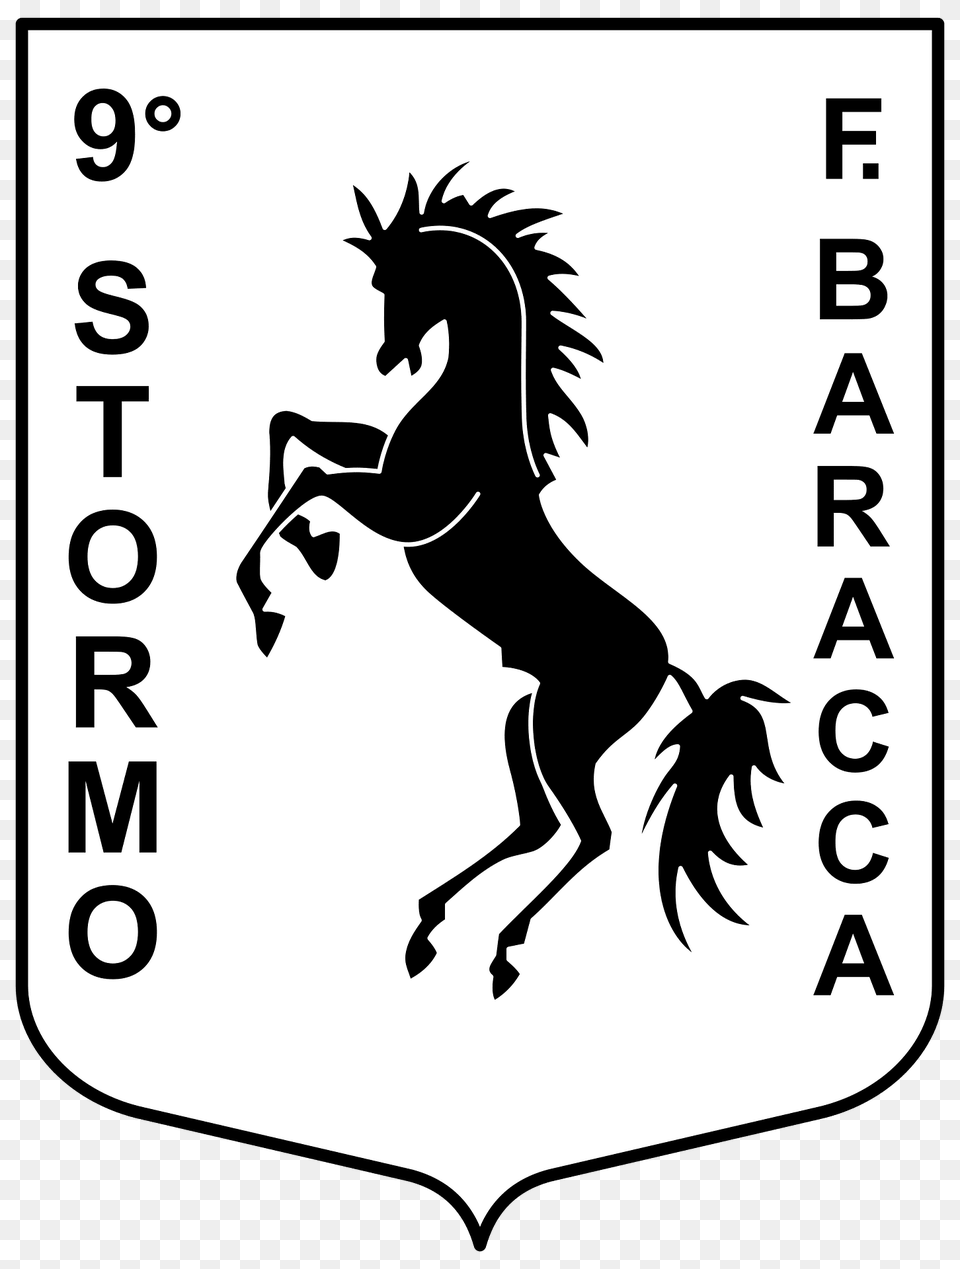 Ensign Of The 9 Stormo Of The Italian Air Force Clipart, Stencil, Baby, Person Png